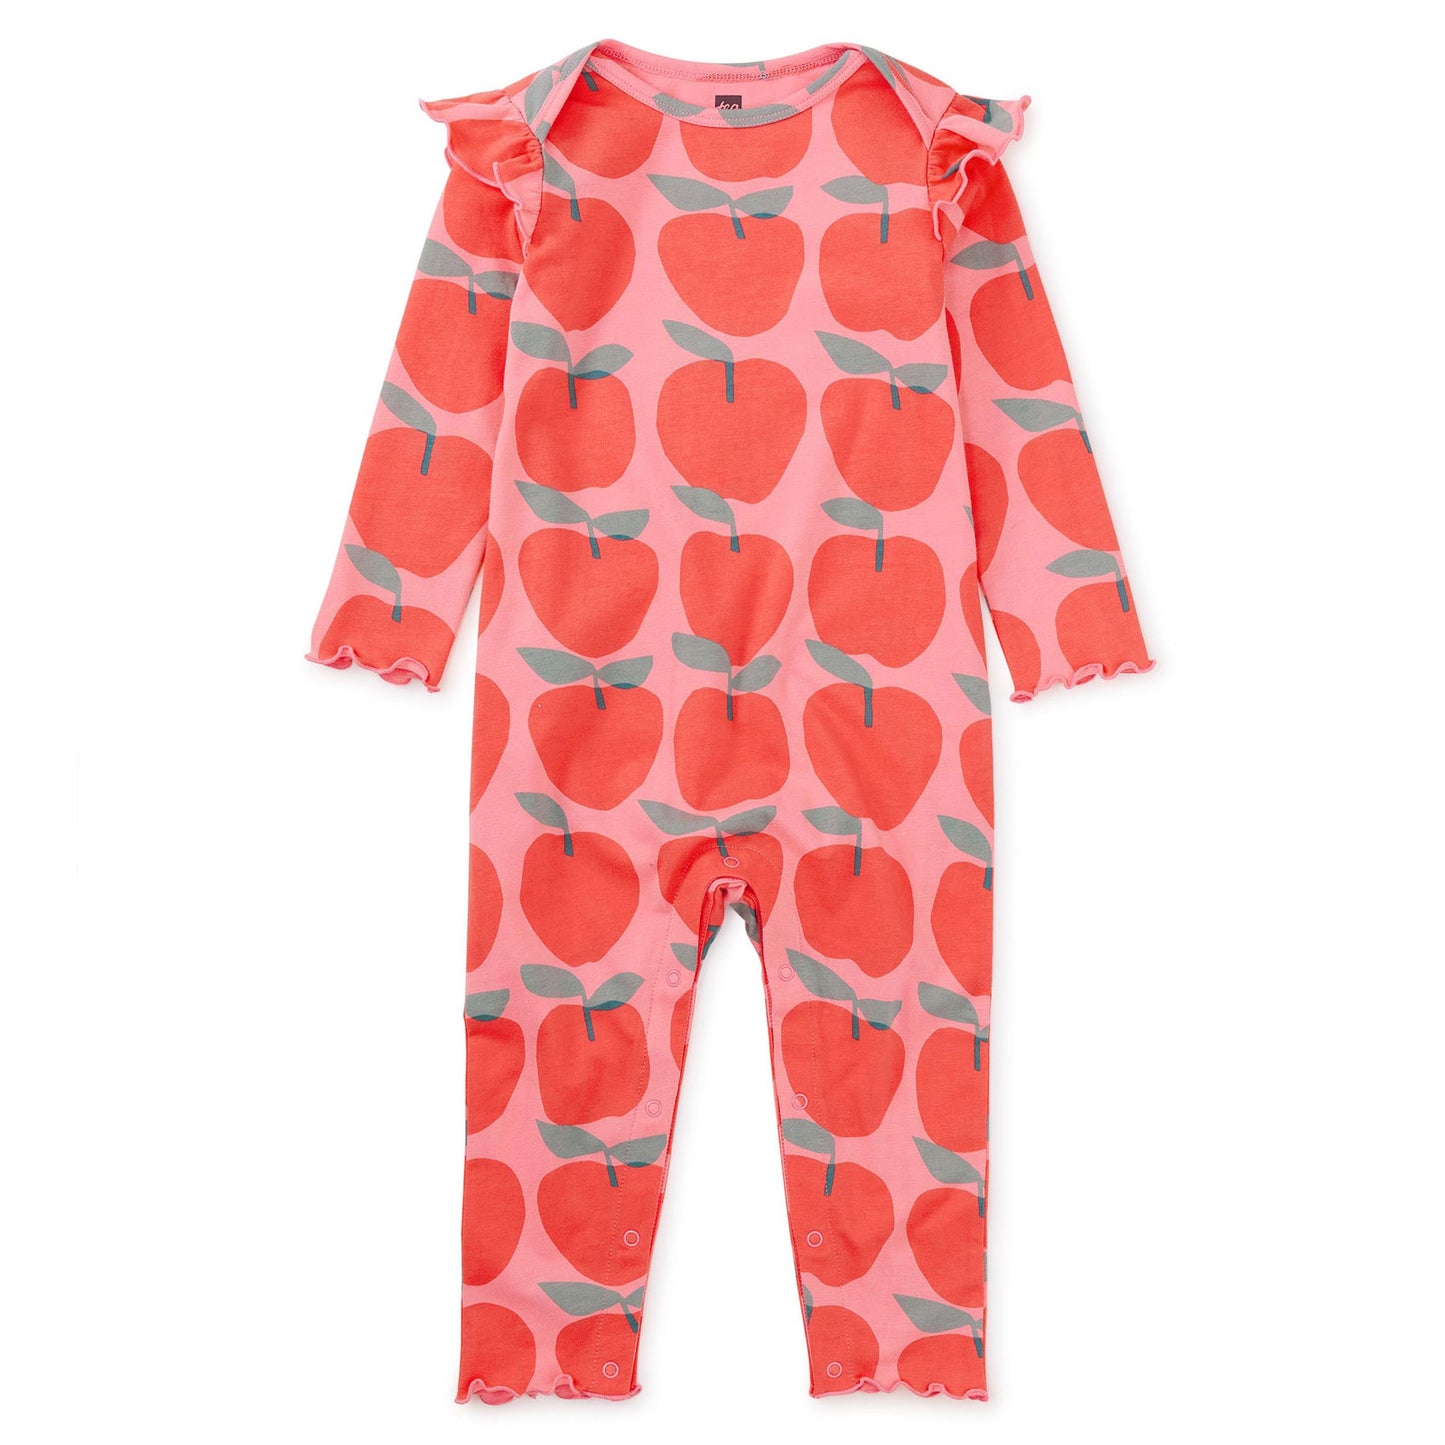 Tea Collection Ruffle Shoulder Baby Romper - Normandy Apples